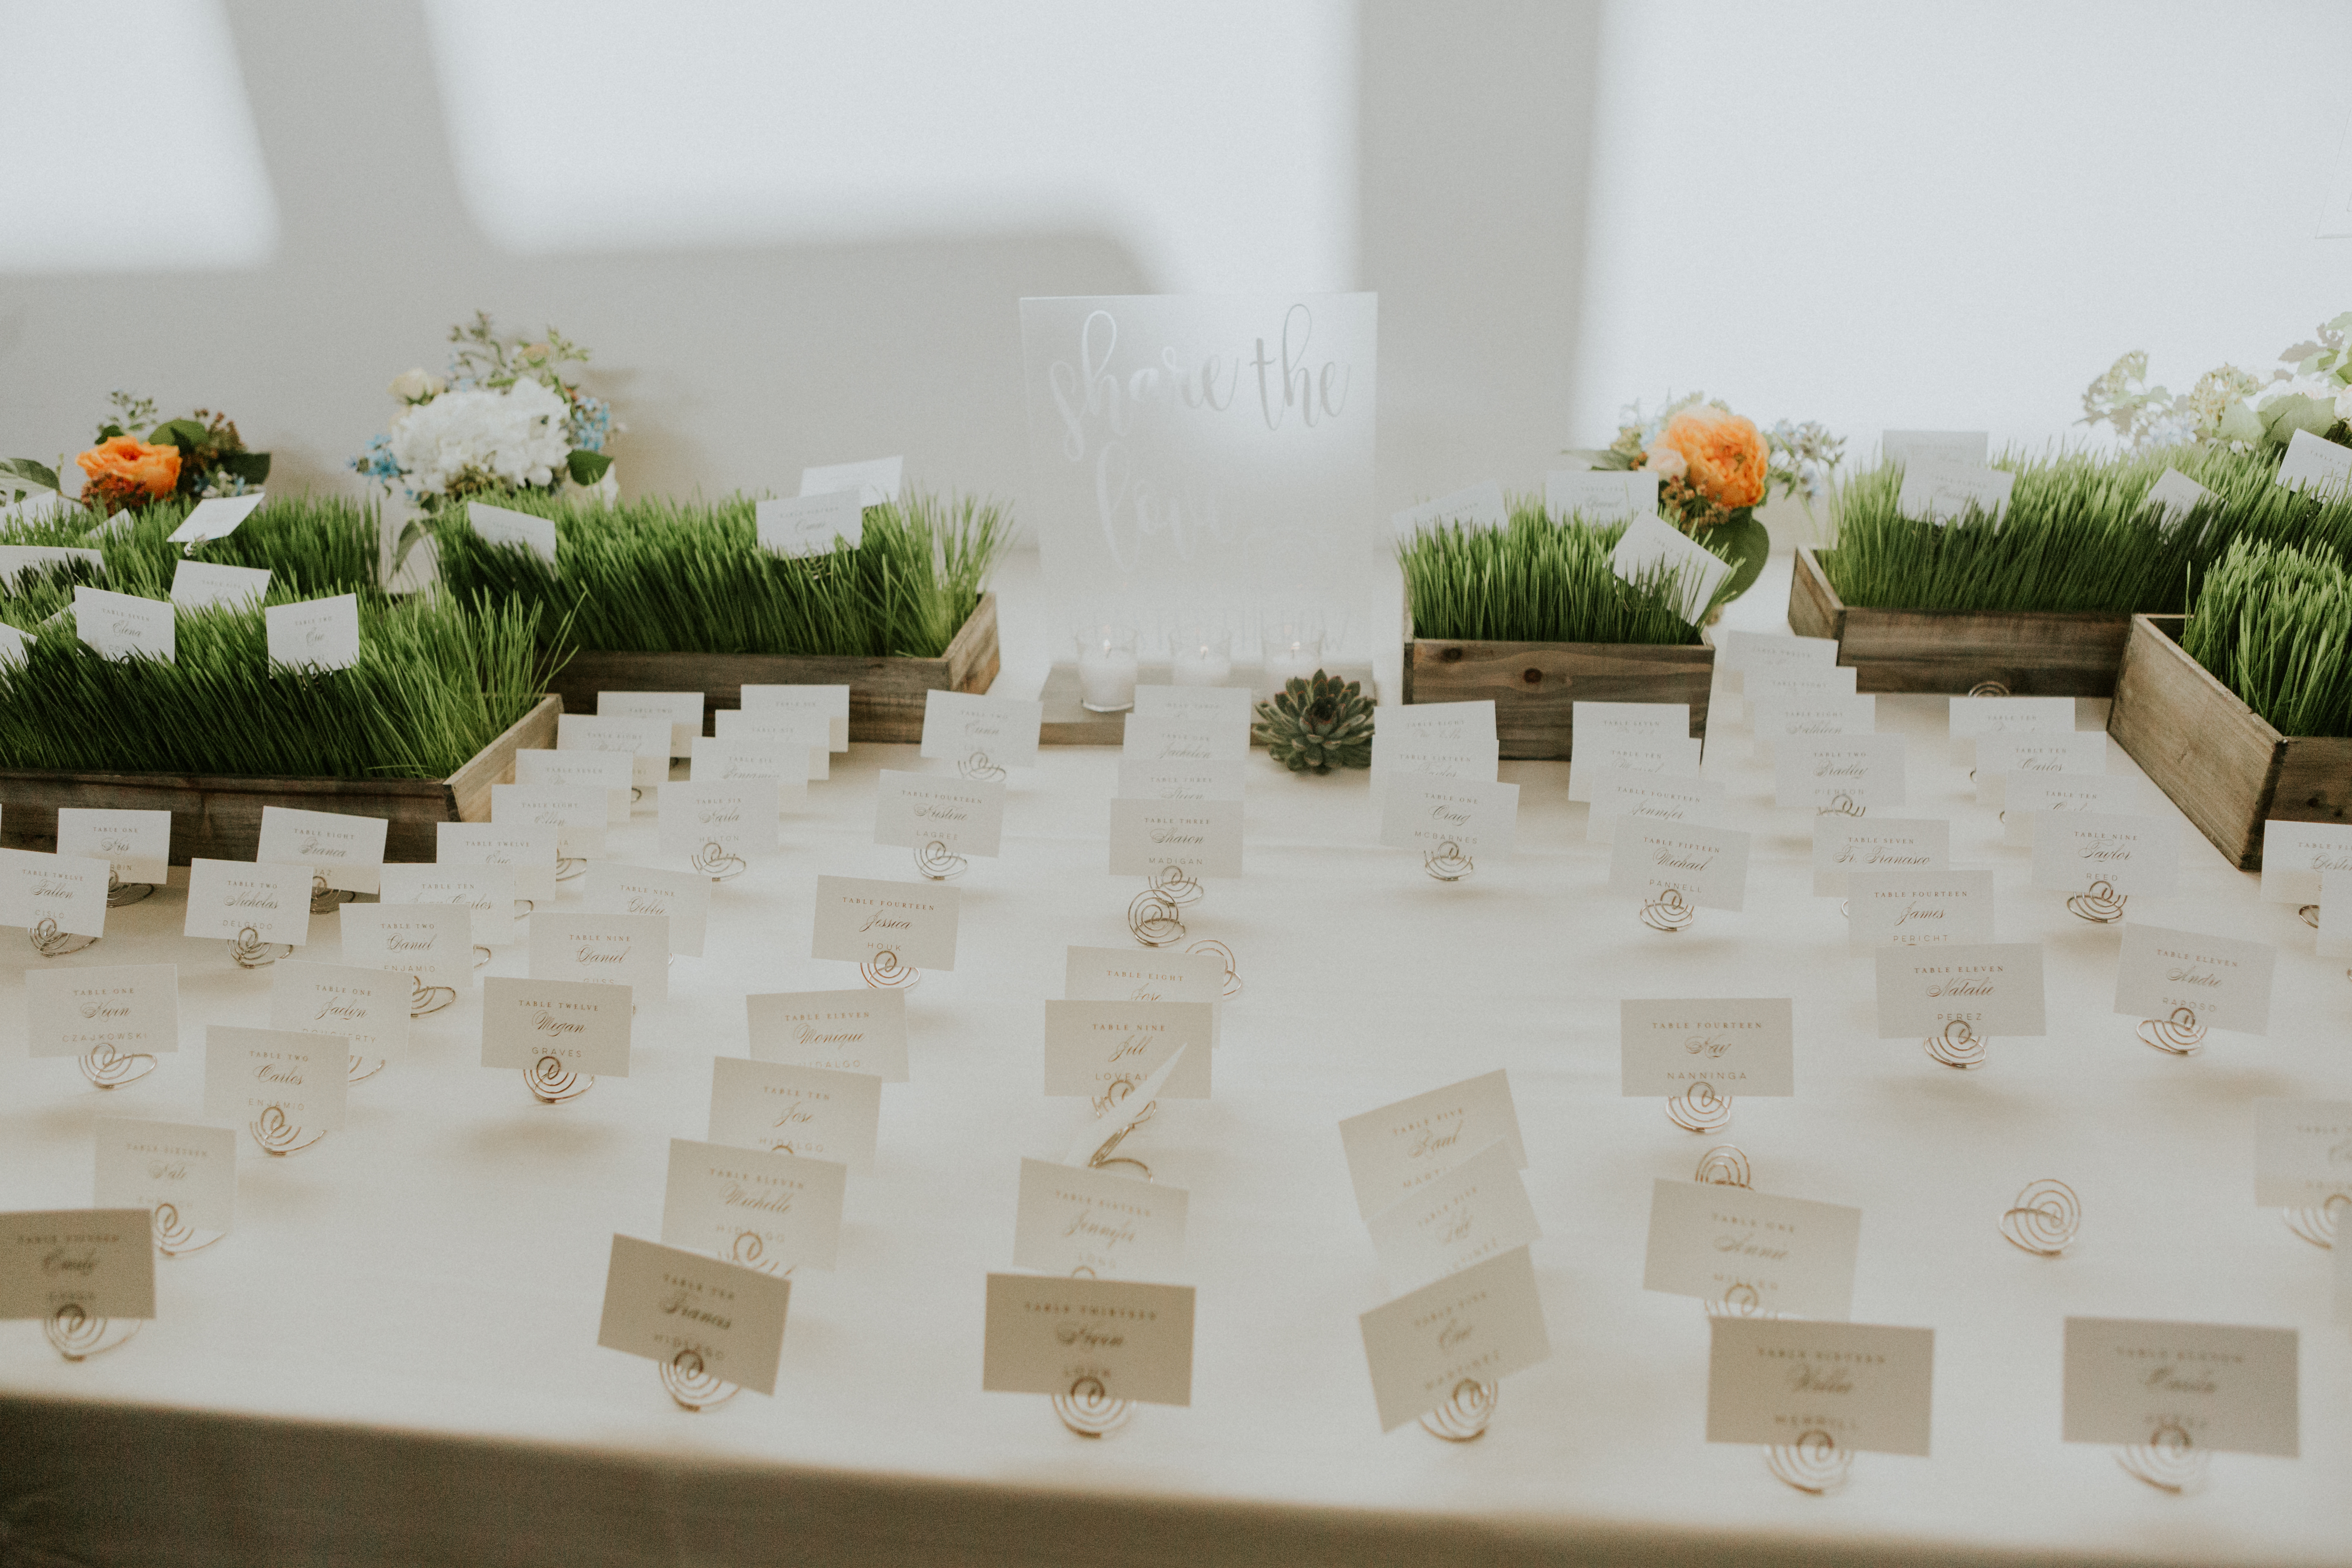 Midsummer wedding table cards with fresh grass decorations in rustic wood boxes.